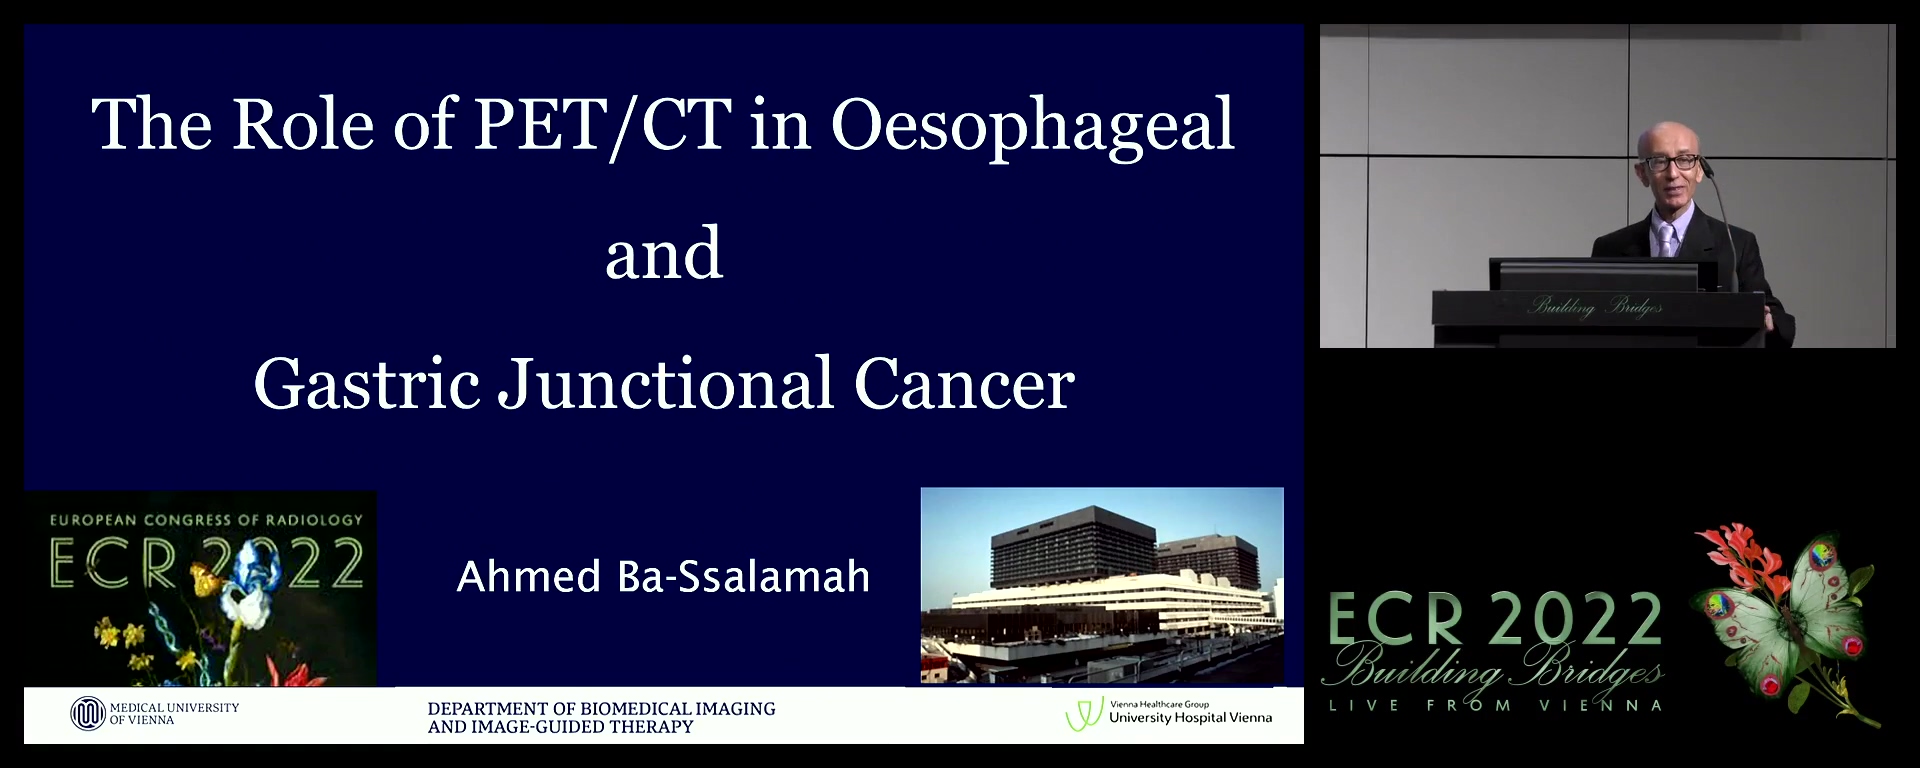 The role of PET/CT in oesophageal and gastric junctional cancer